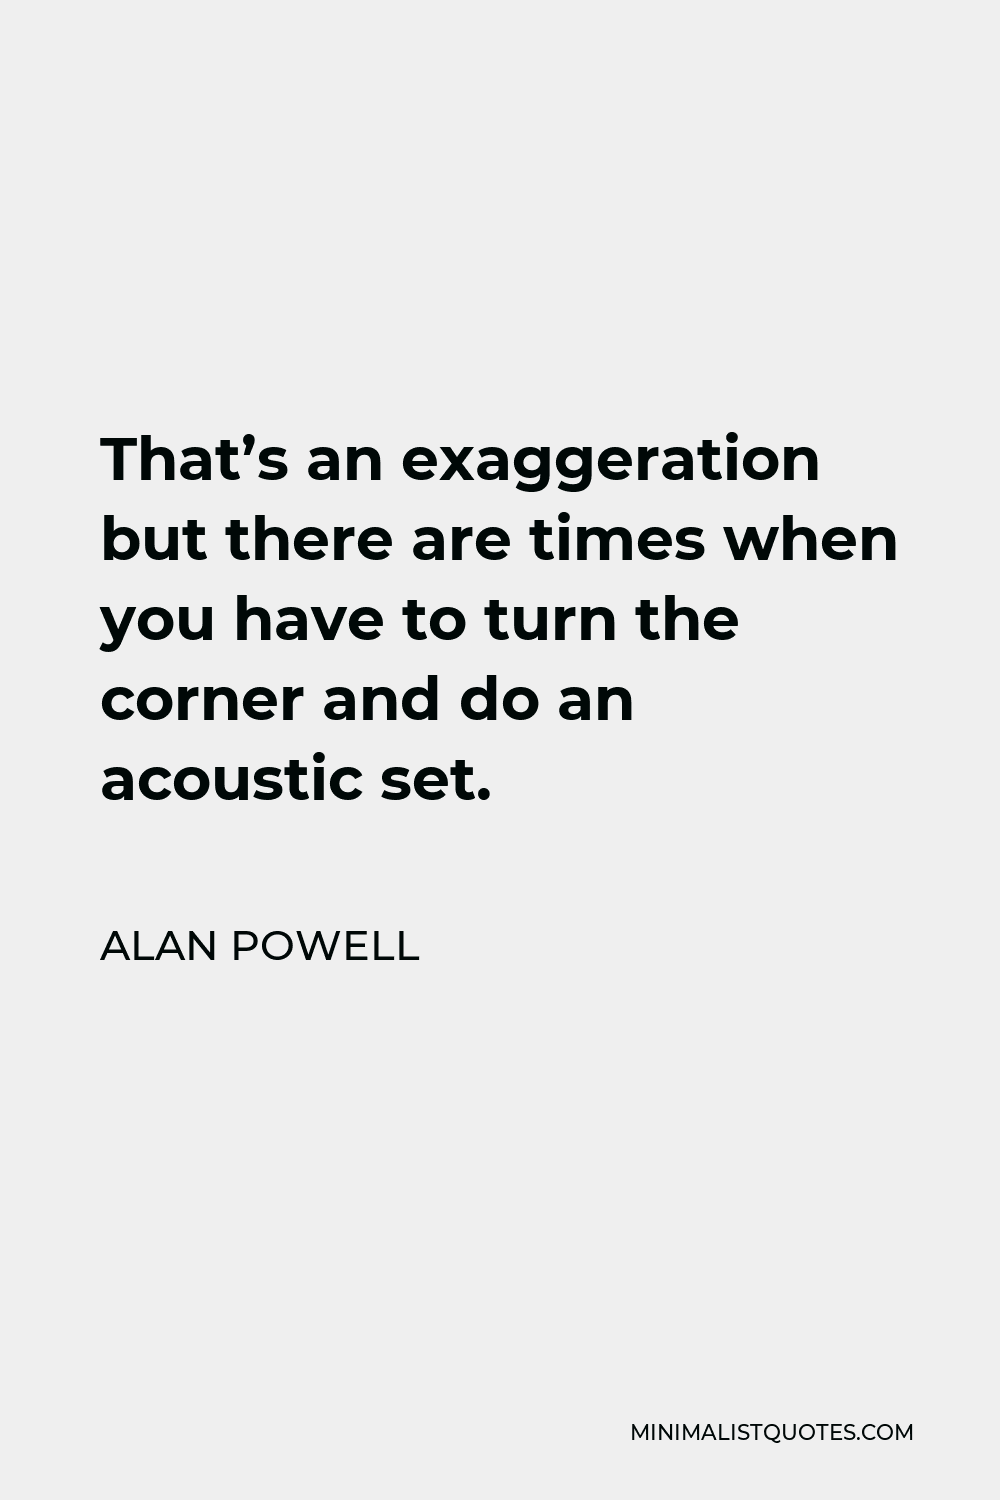 Alan Powell Quote - That’s an exaggeration but there are times when you have to turn the corner and do an acoustic set.